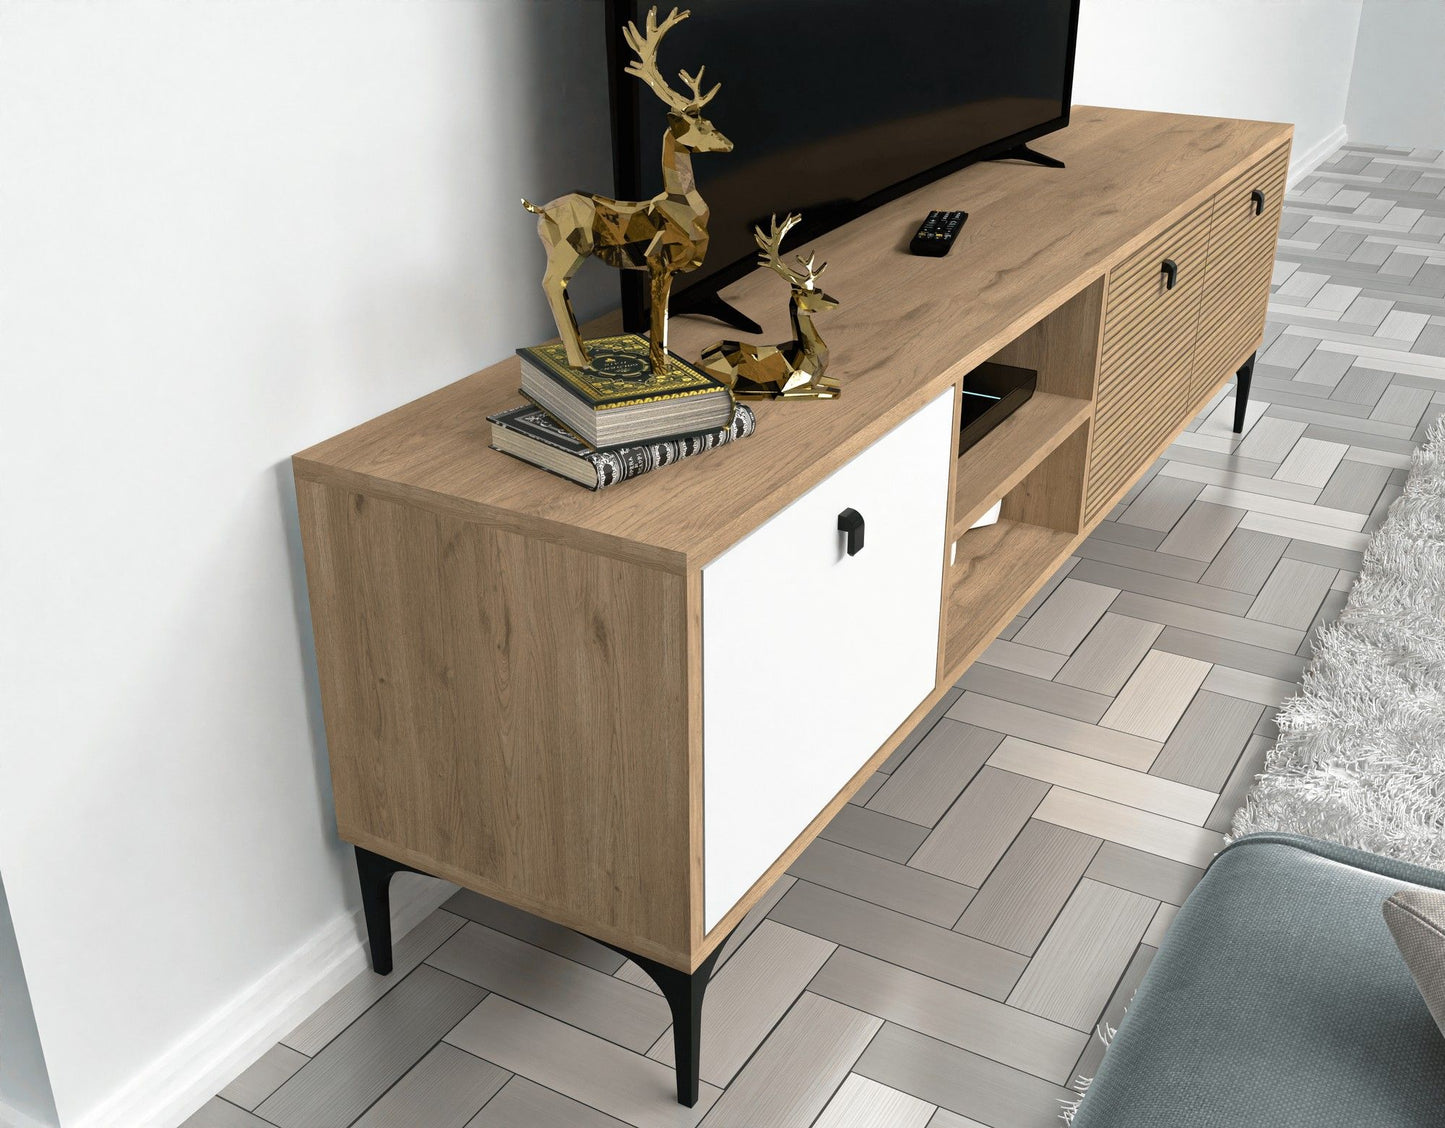 Vision 1366 - TV Stand